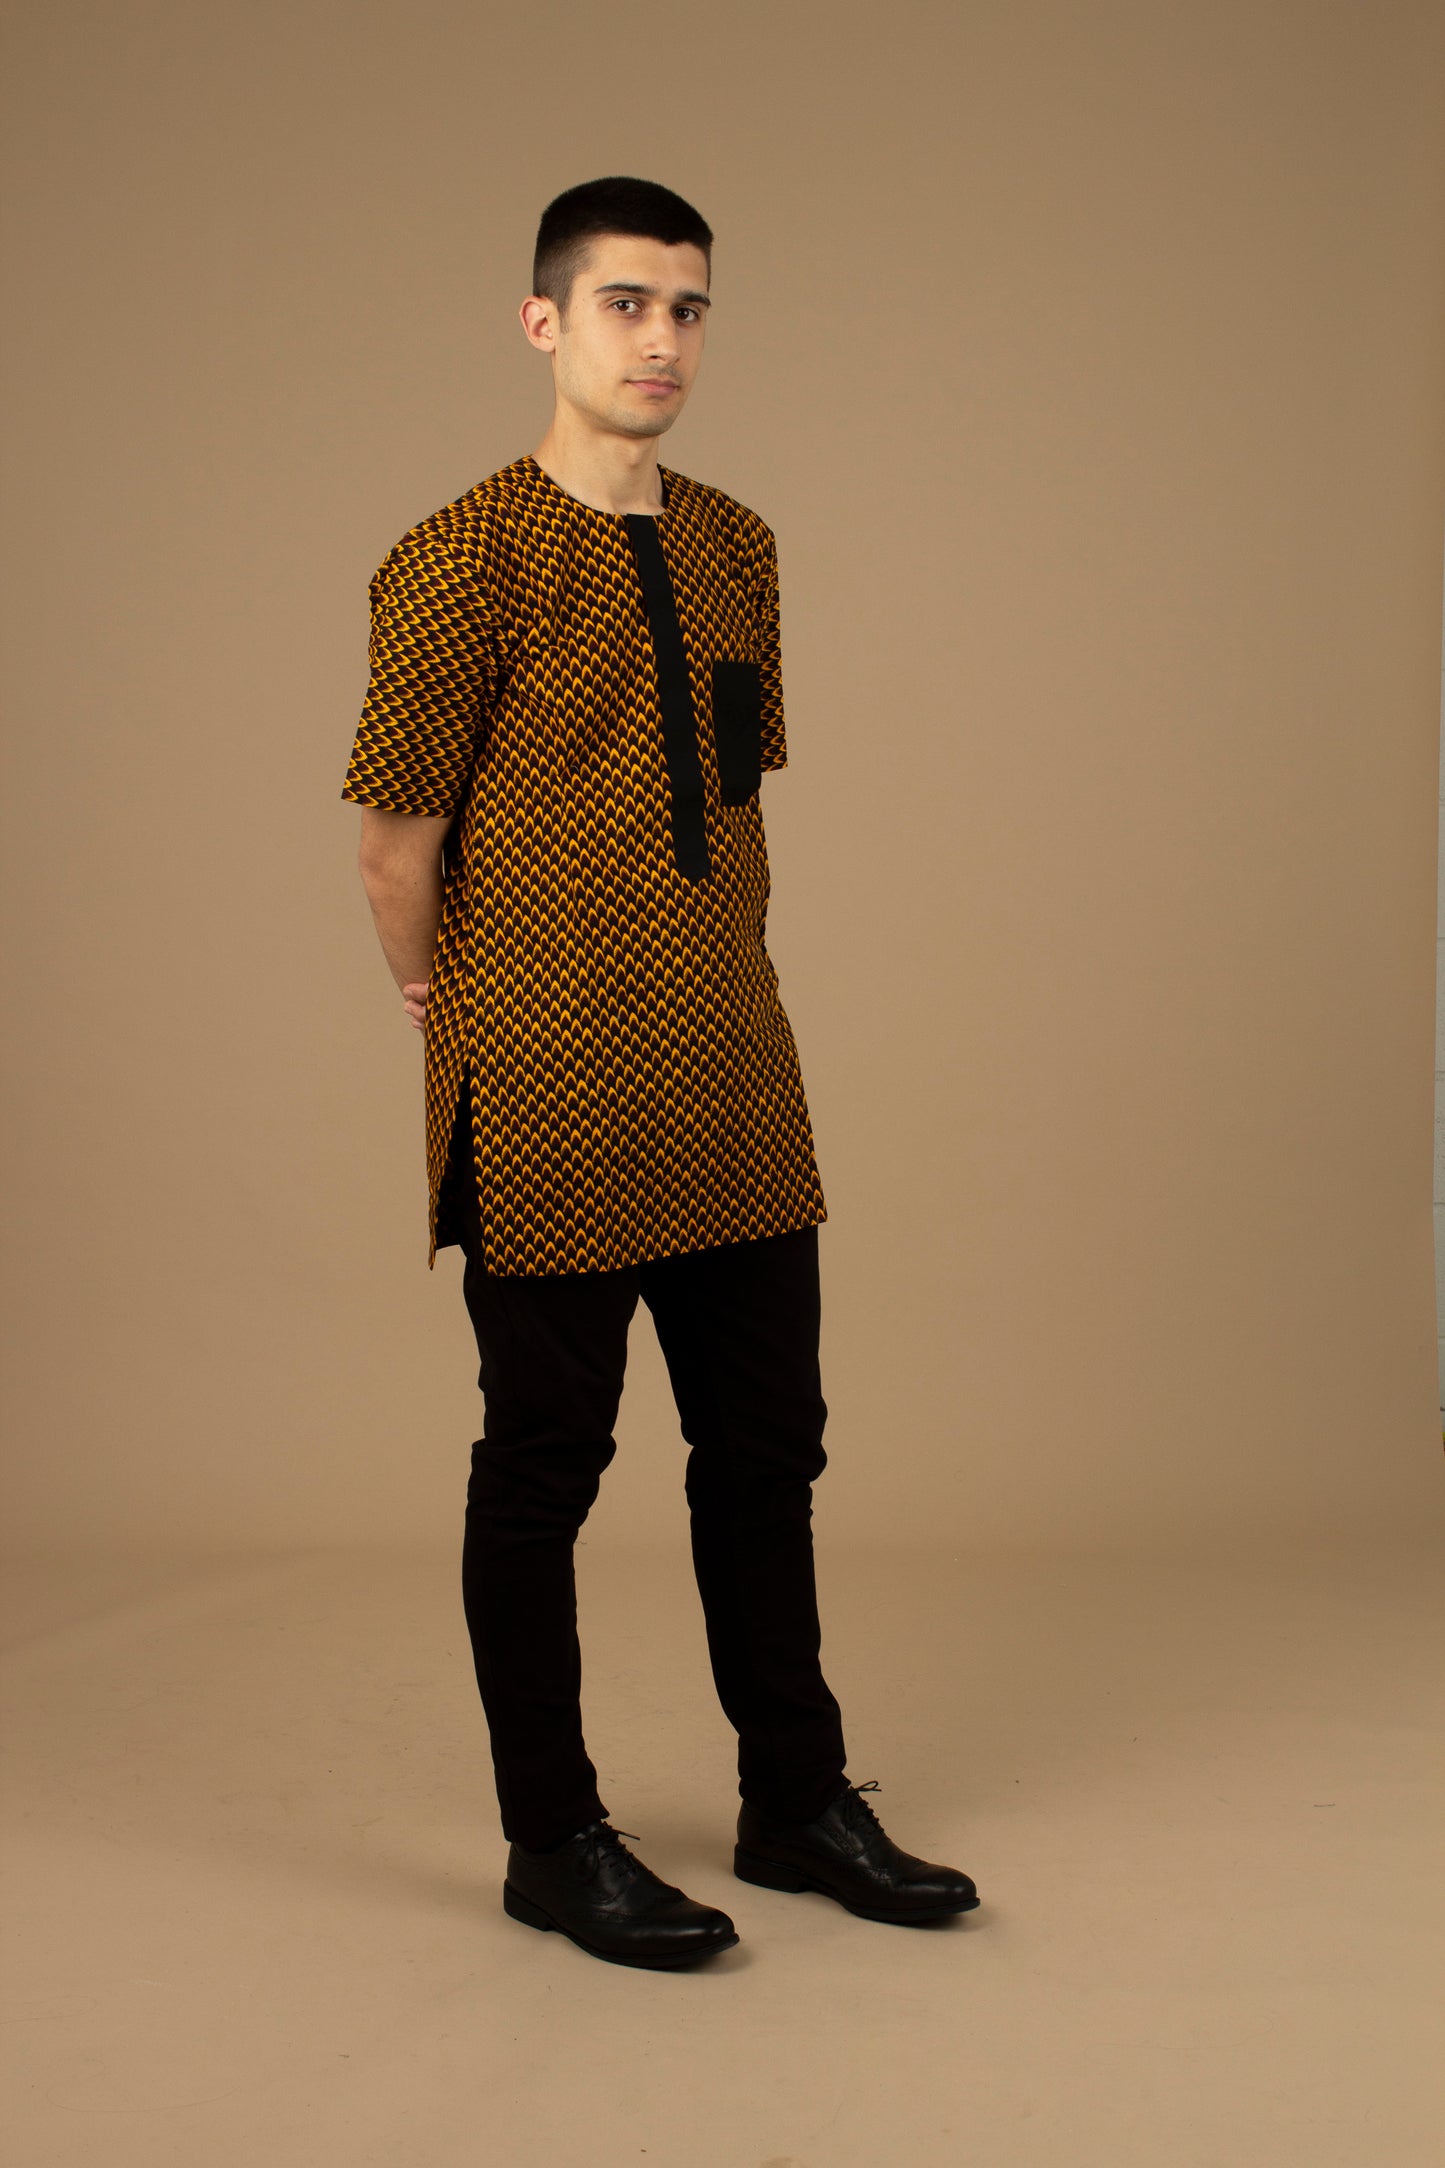 Vero African Print Kaftan Top is an ethically printed Matte Black Trimmed, Wax printed body style men's Kaftan top made from sustainably selected Cotton Ankara wax print in a repeated geometric brown and yellow African print pattern. Designed in England Made in Nigeria.